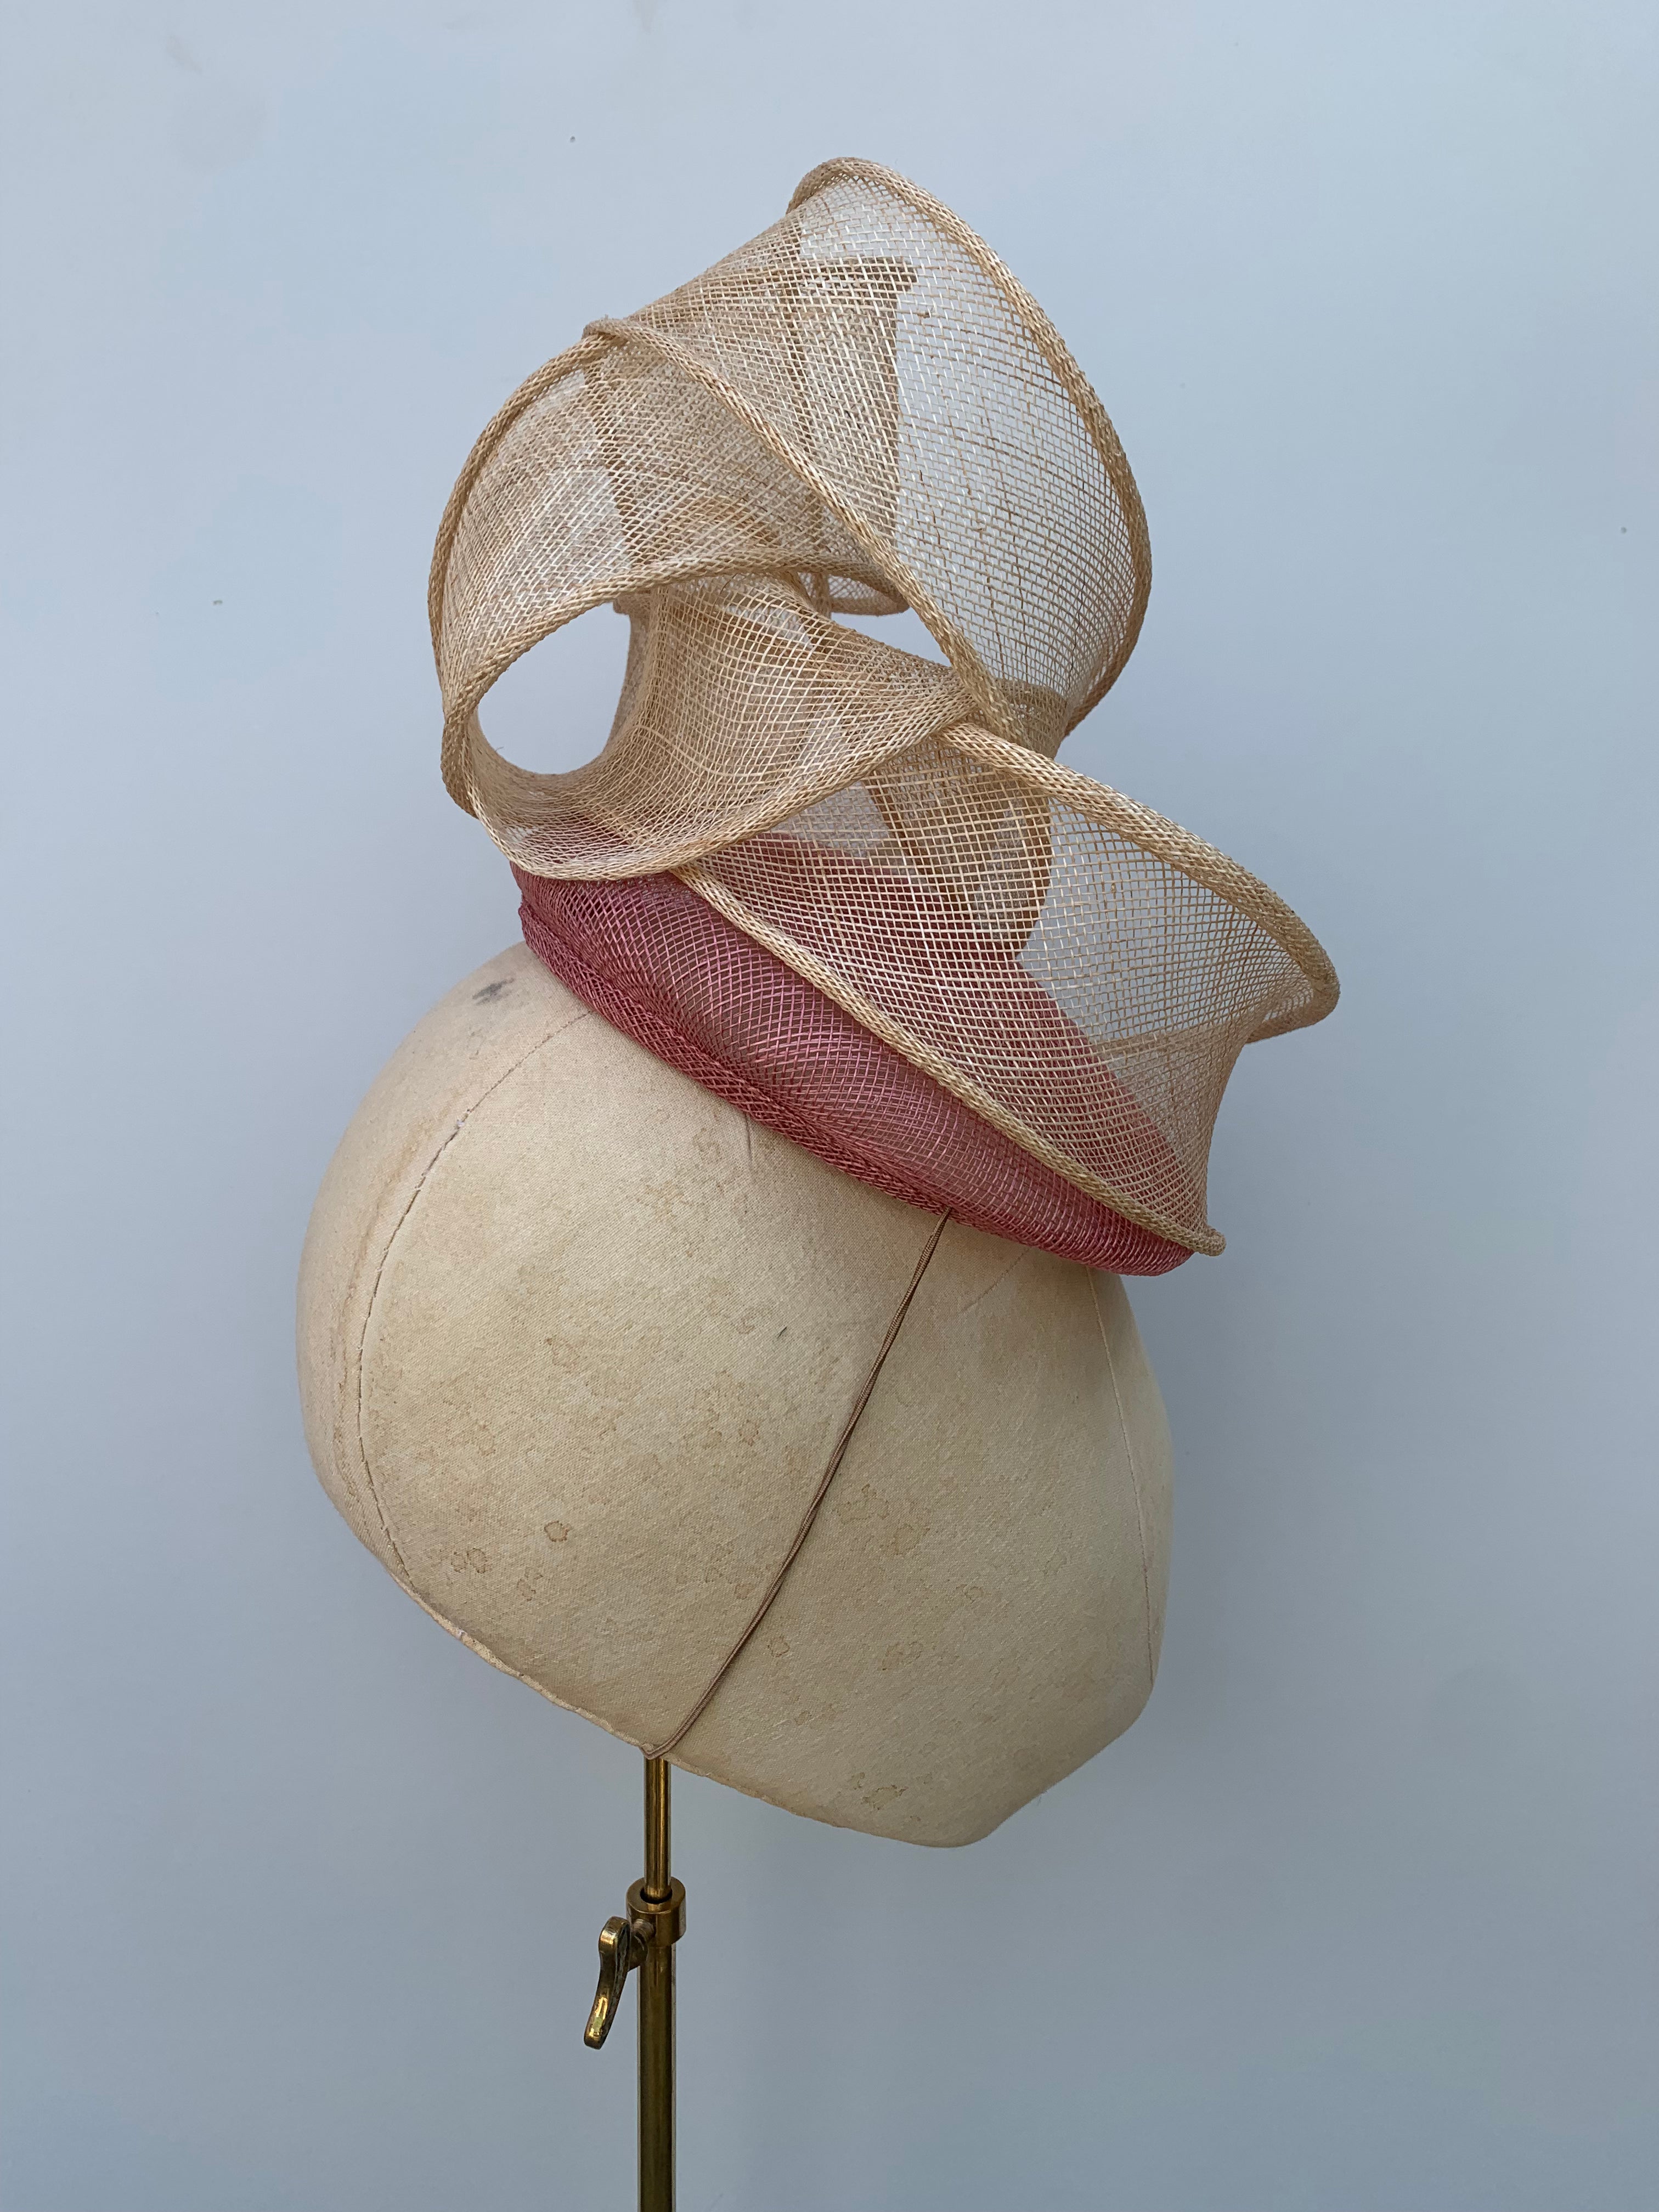 Signature Sculpture in blush pink and beige